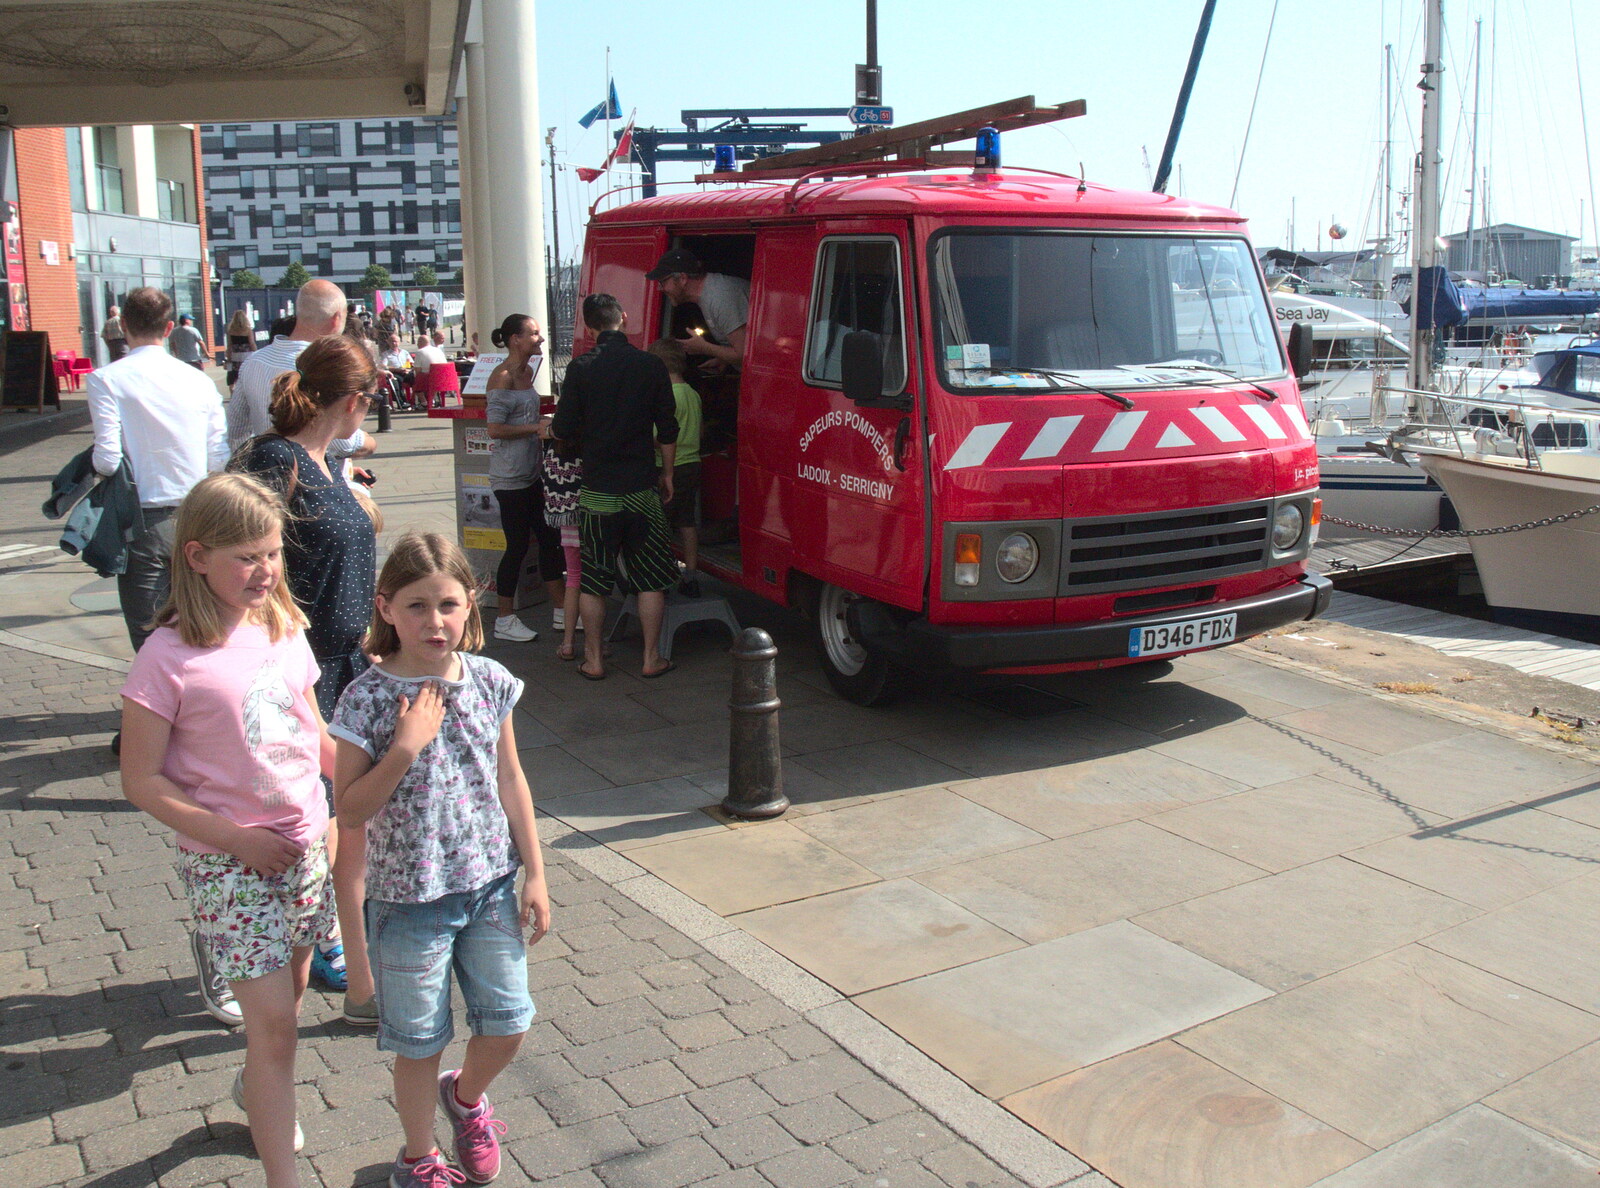 A Sapeurs-Pompiers van on the quayside from An Unexpected Birthday, Ipswich, Suffolk - 26th May 2018